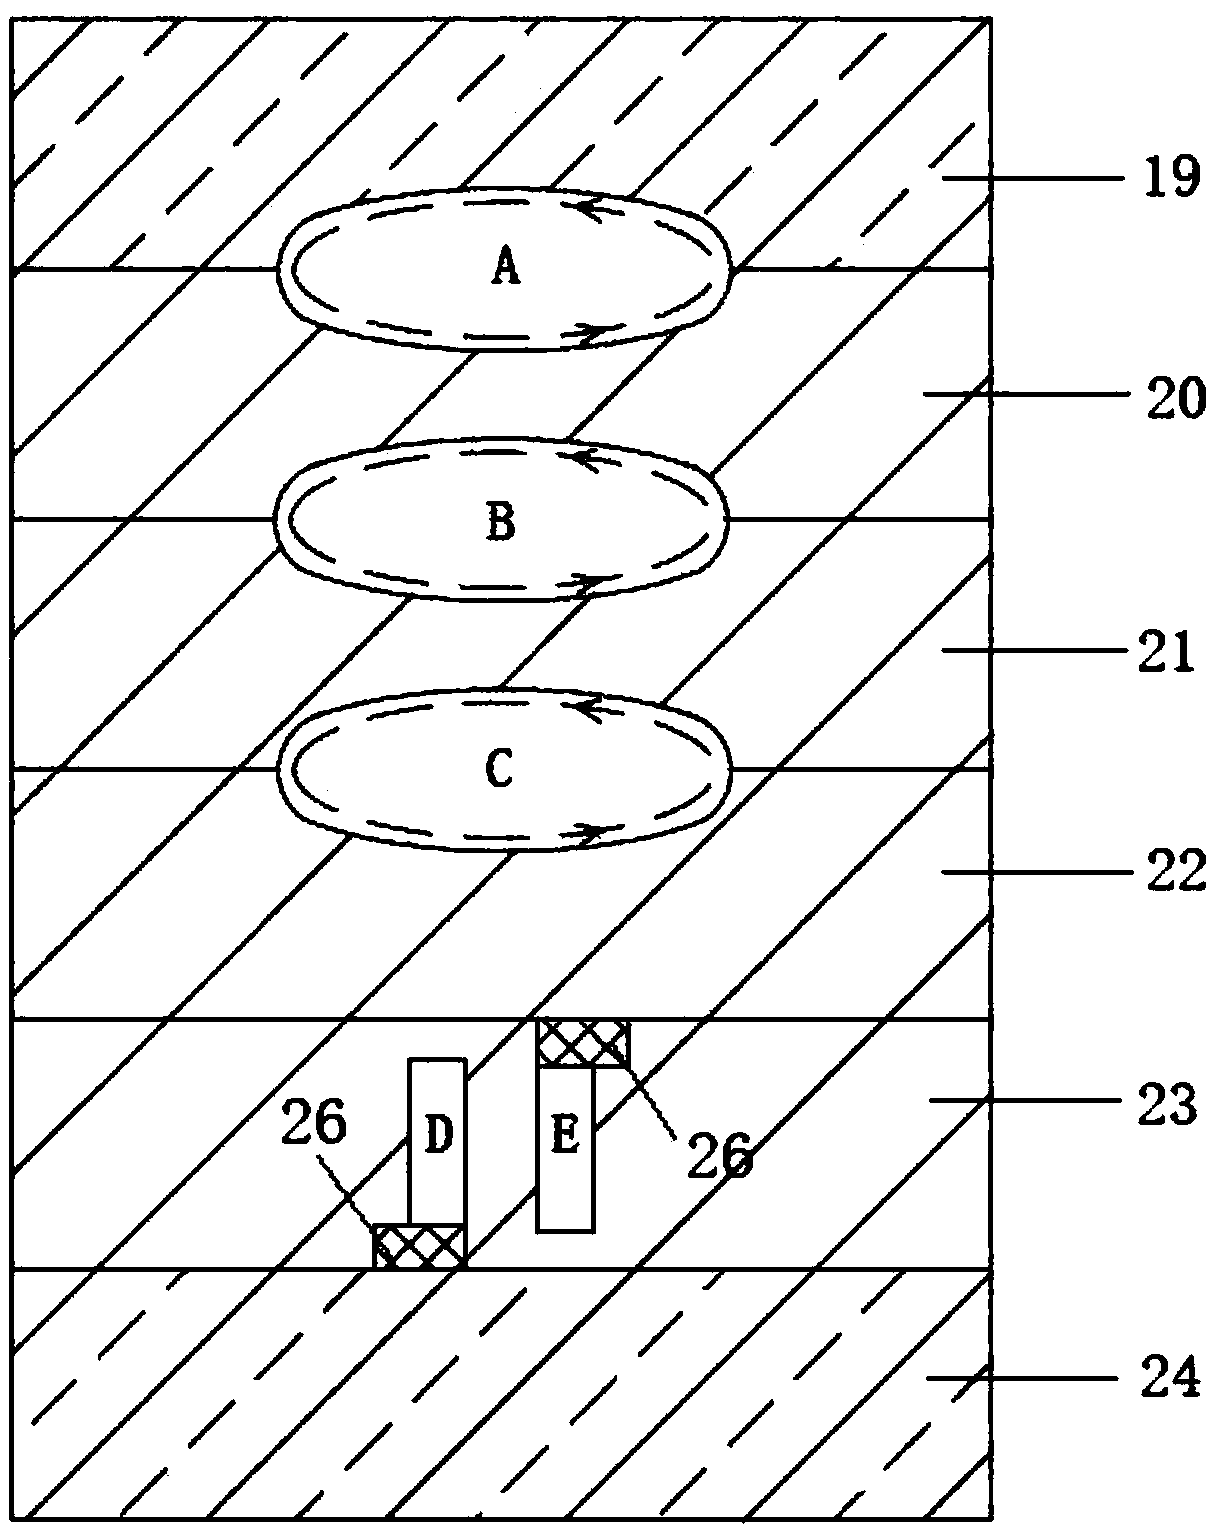 Apparatus and method for rapid hydrothermal synthesis